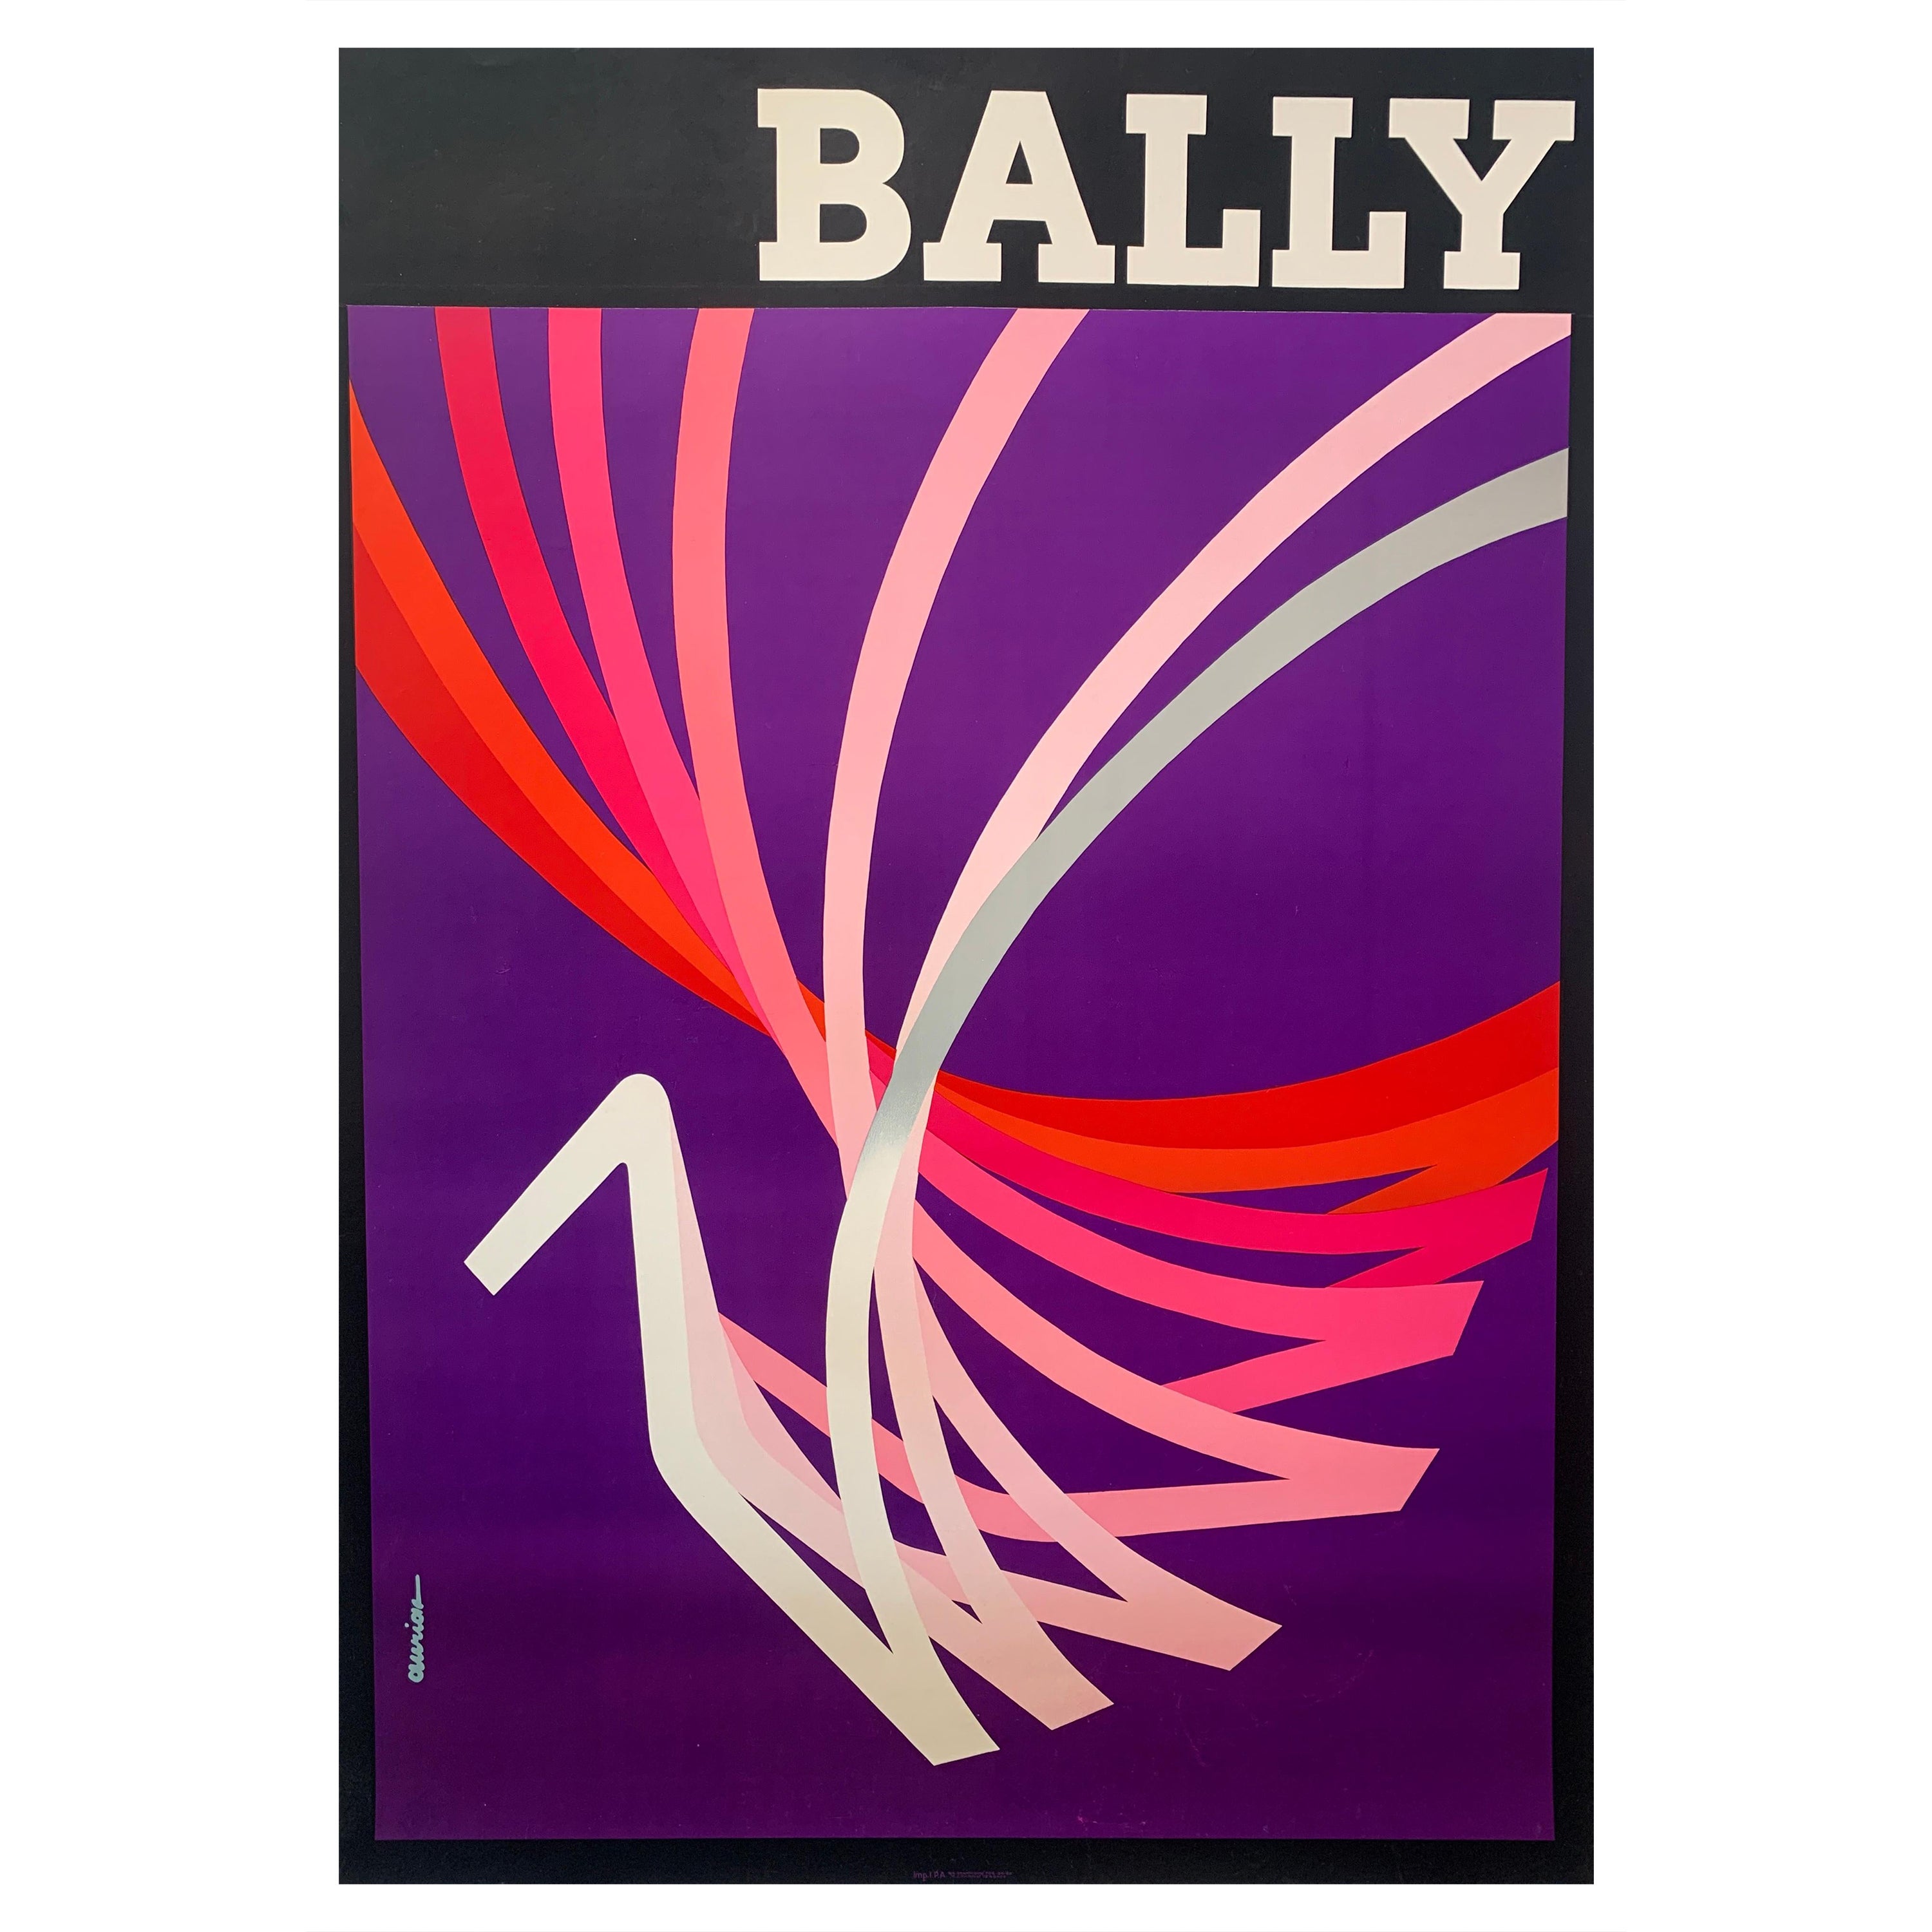 Original Vintage Fashion Advertising Poster, Bally Kinetic Woman, 1981 by AURIAC For Sale